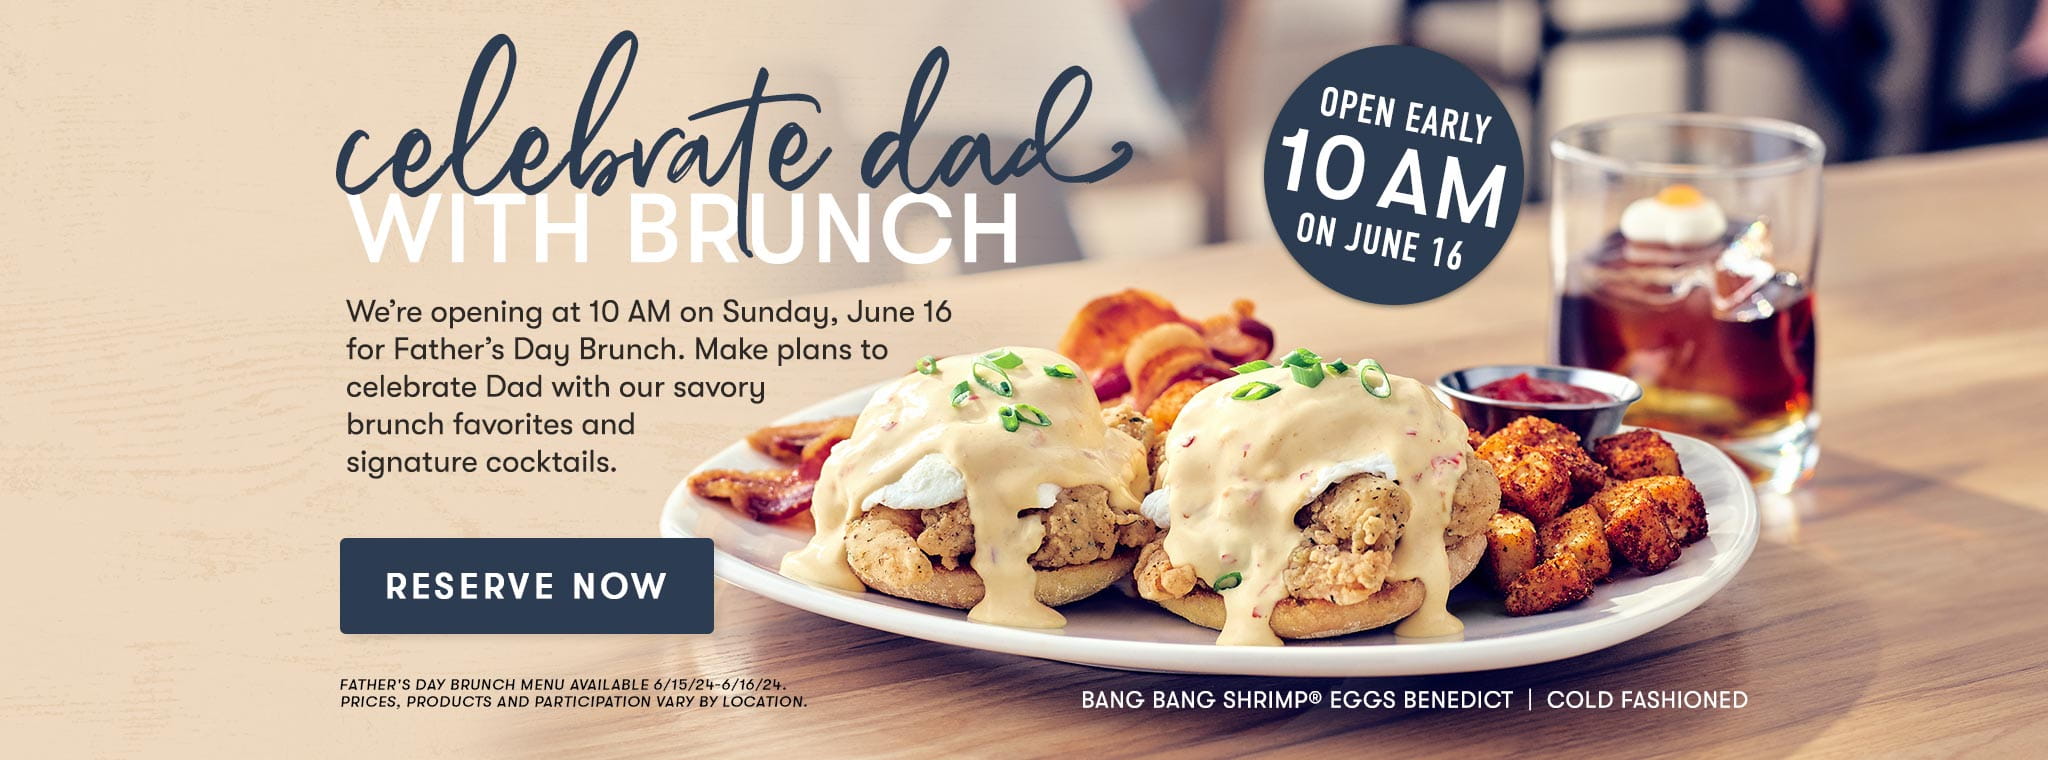 Celebrate dad with brunch - open early 10am on June 16